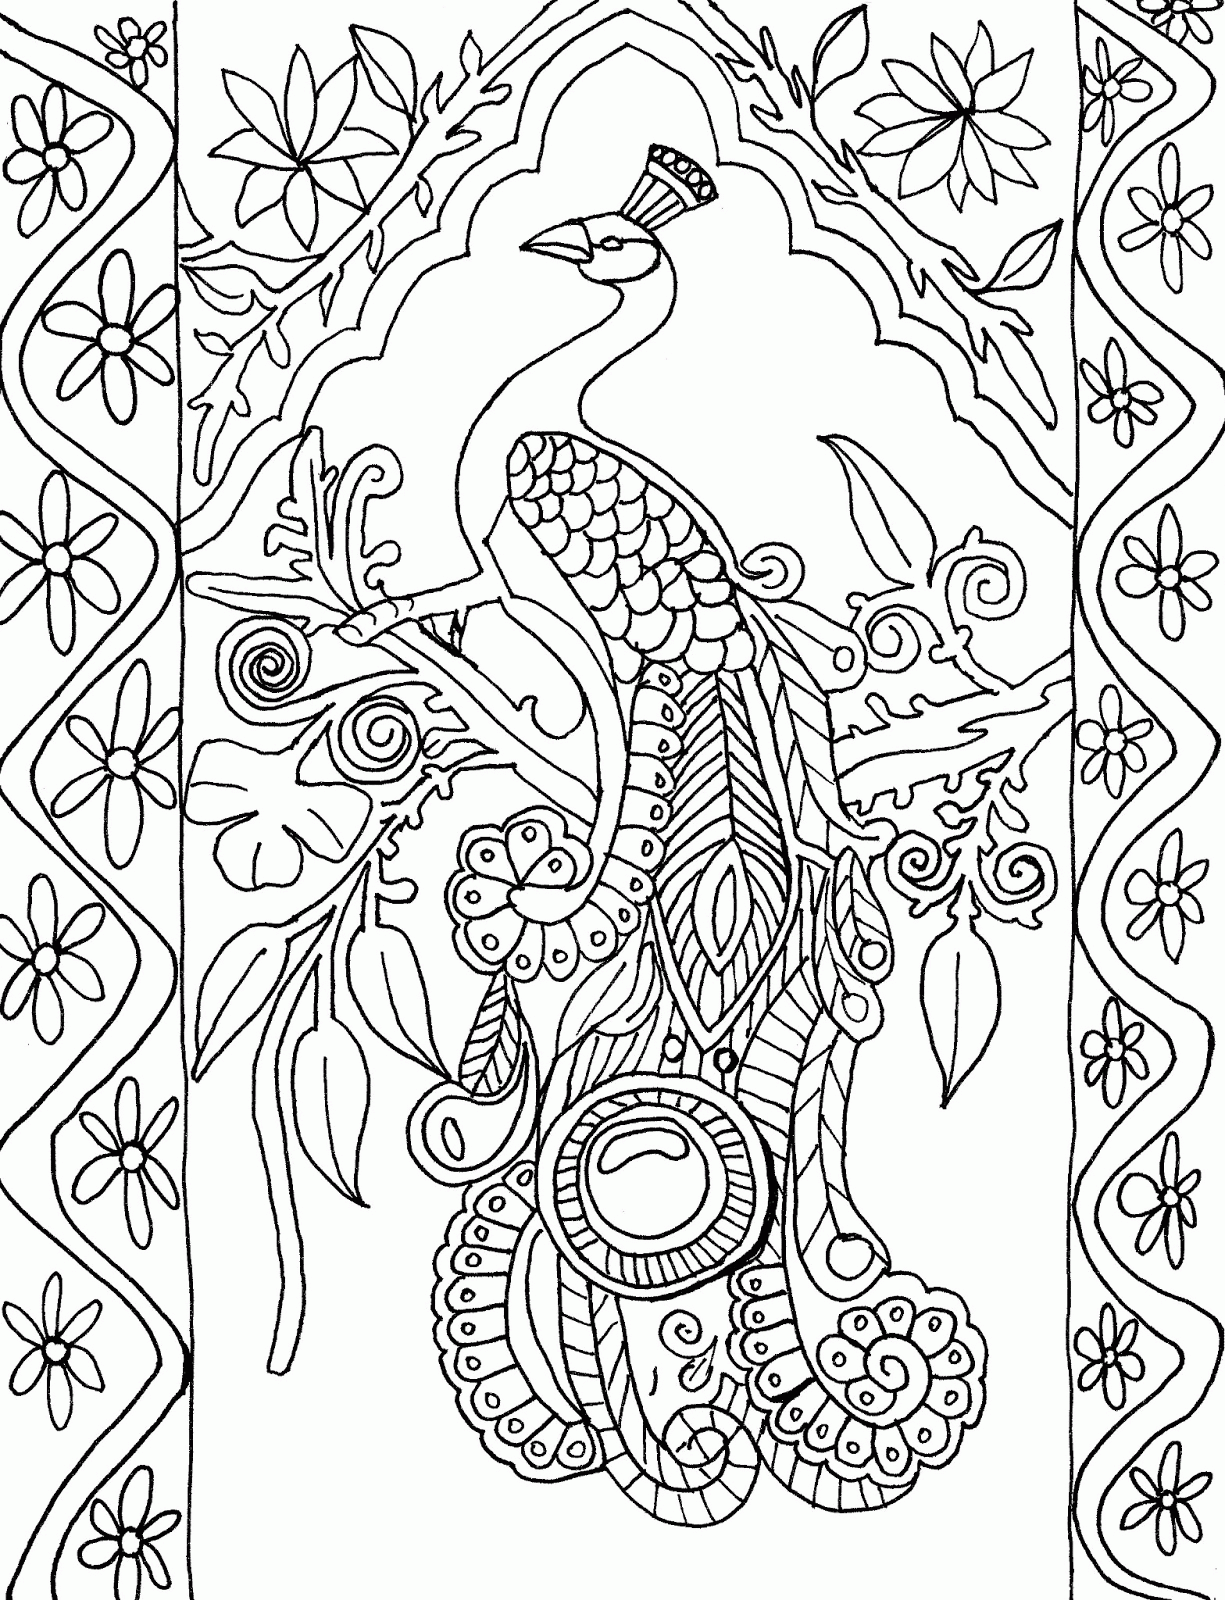 Related Peacock Coloring Pages item-10999, Peacock Coloring Pages ...